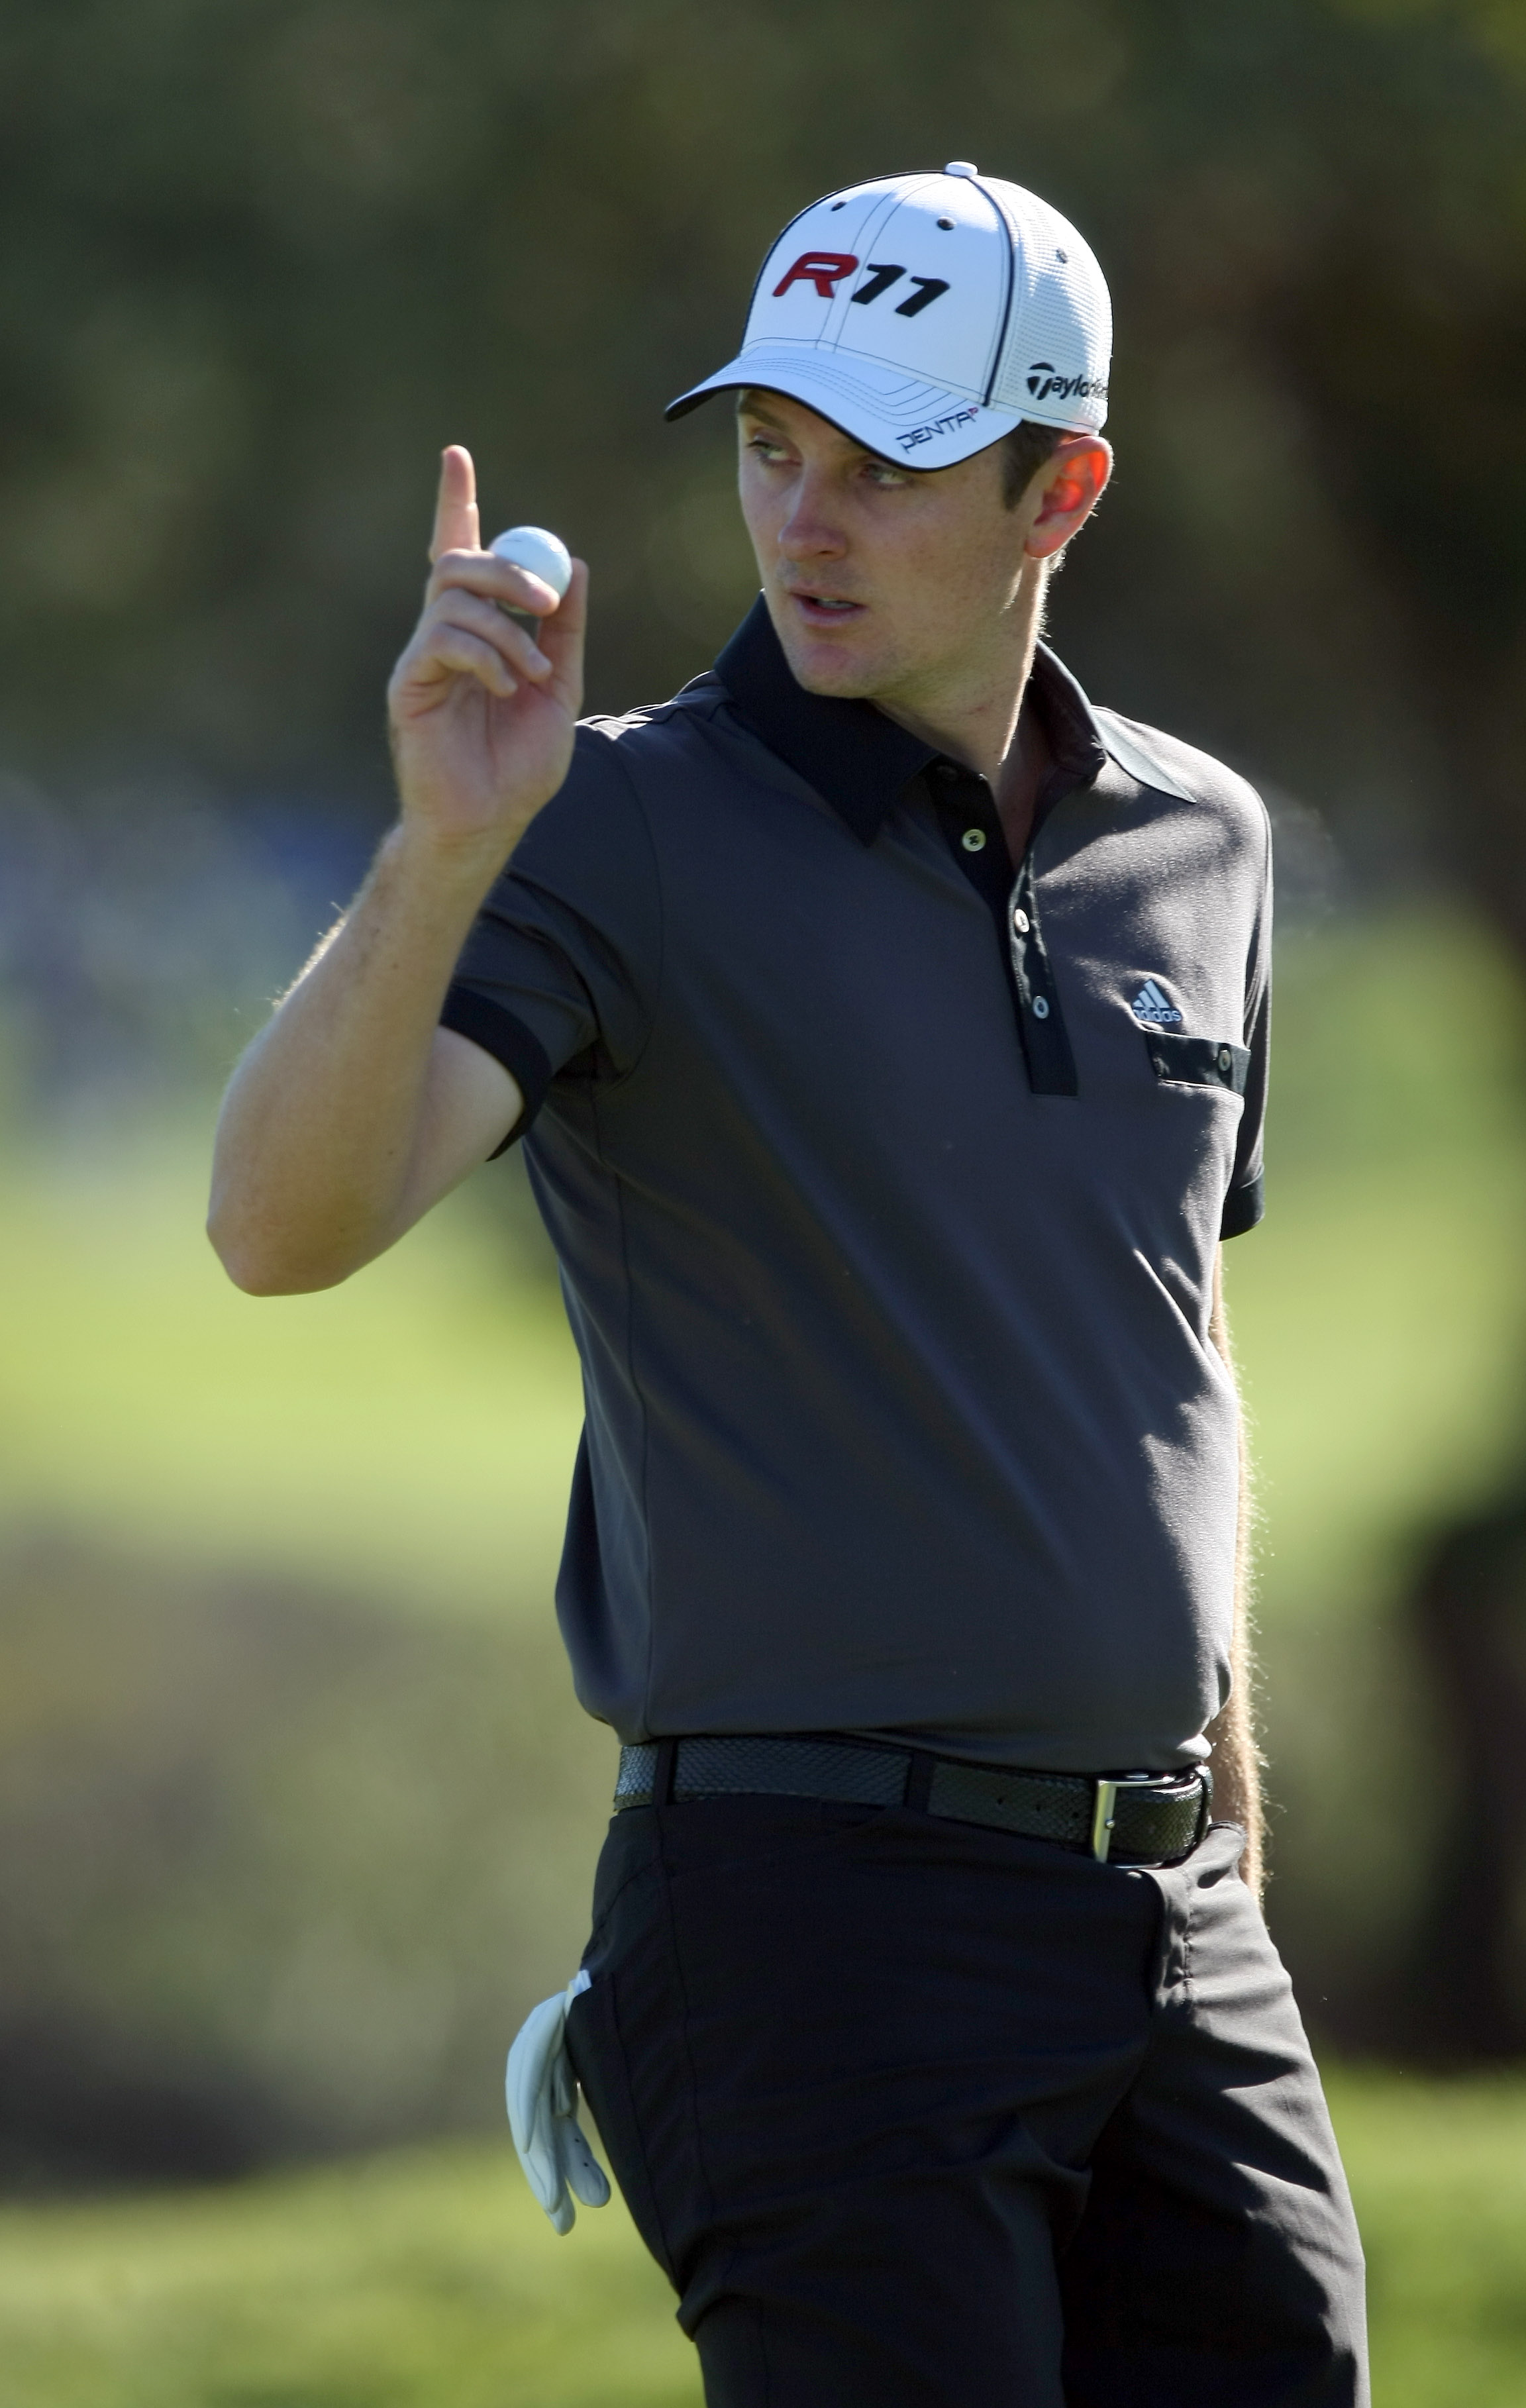 LA JOLLA, CA - JANUARY 28:  Justin Rose of England waves after his putt on the12th hole during the second round of the Farmers Insurance Open at Torrey Pines on January 28, 2011 in La Jolla, California. (Photo by Donald Miralle/Getty Images)